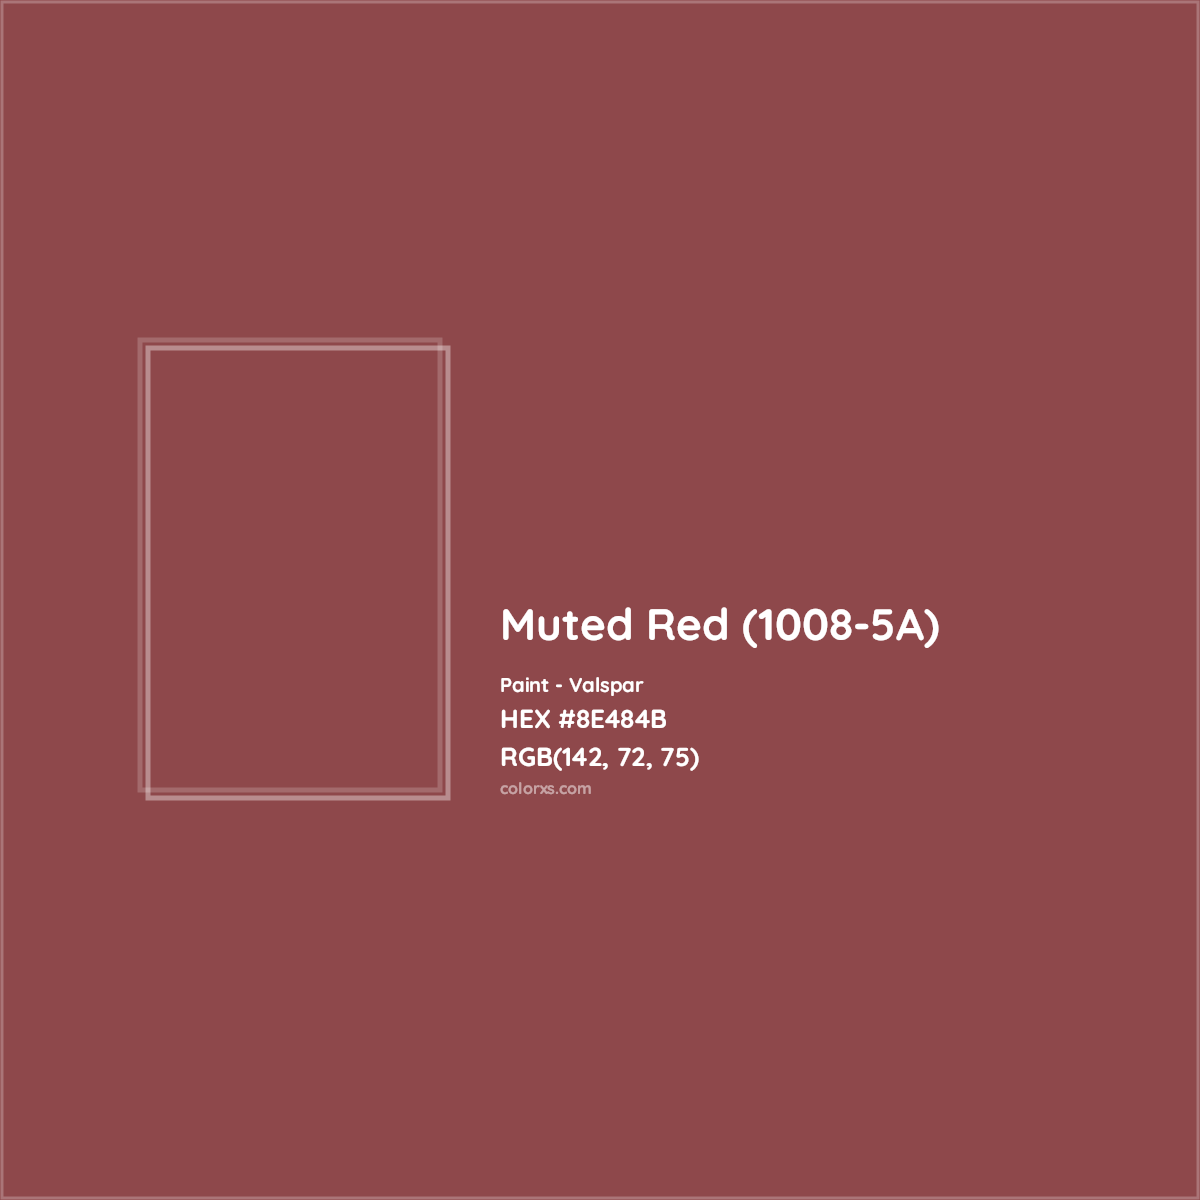 HEX #8E484B Muted Red (1008-5A) Paint Valspar - Color Code